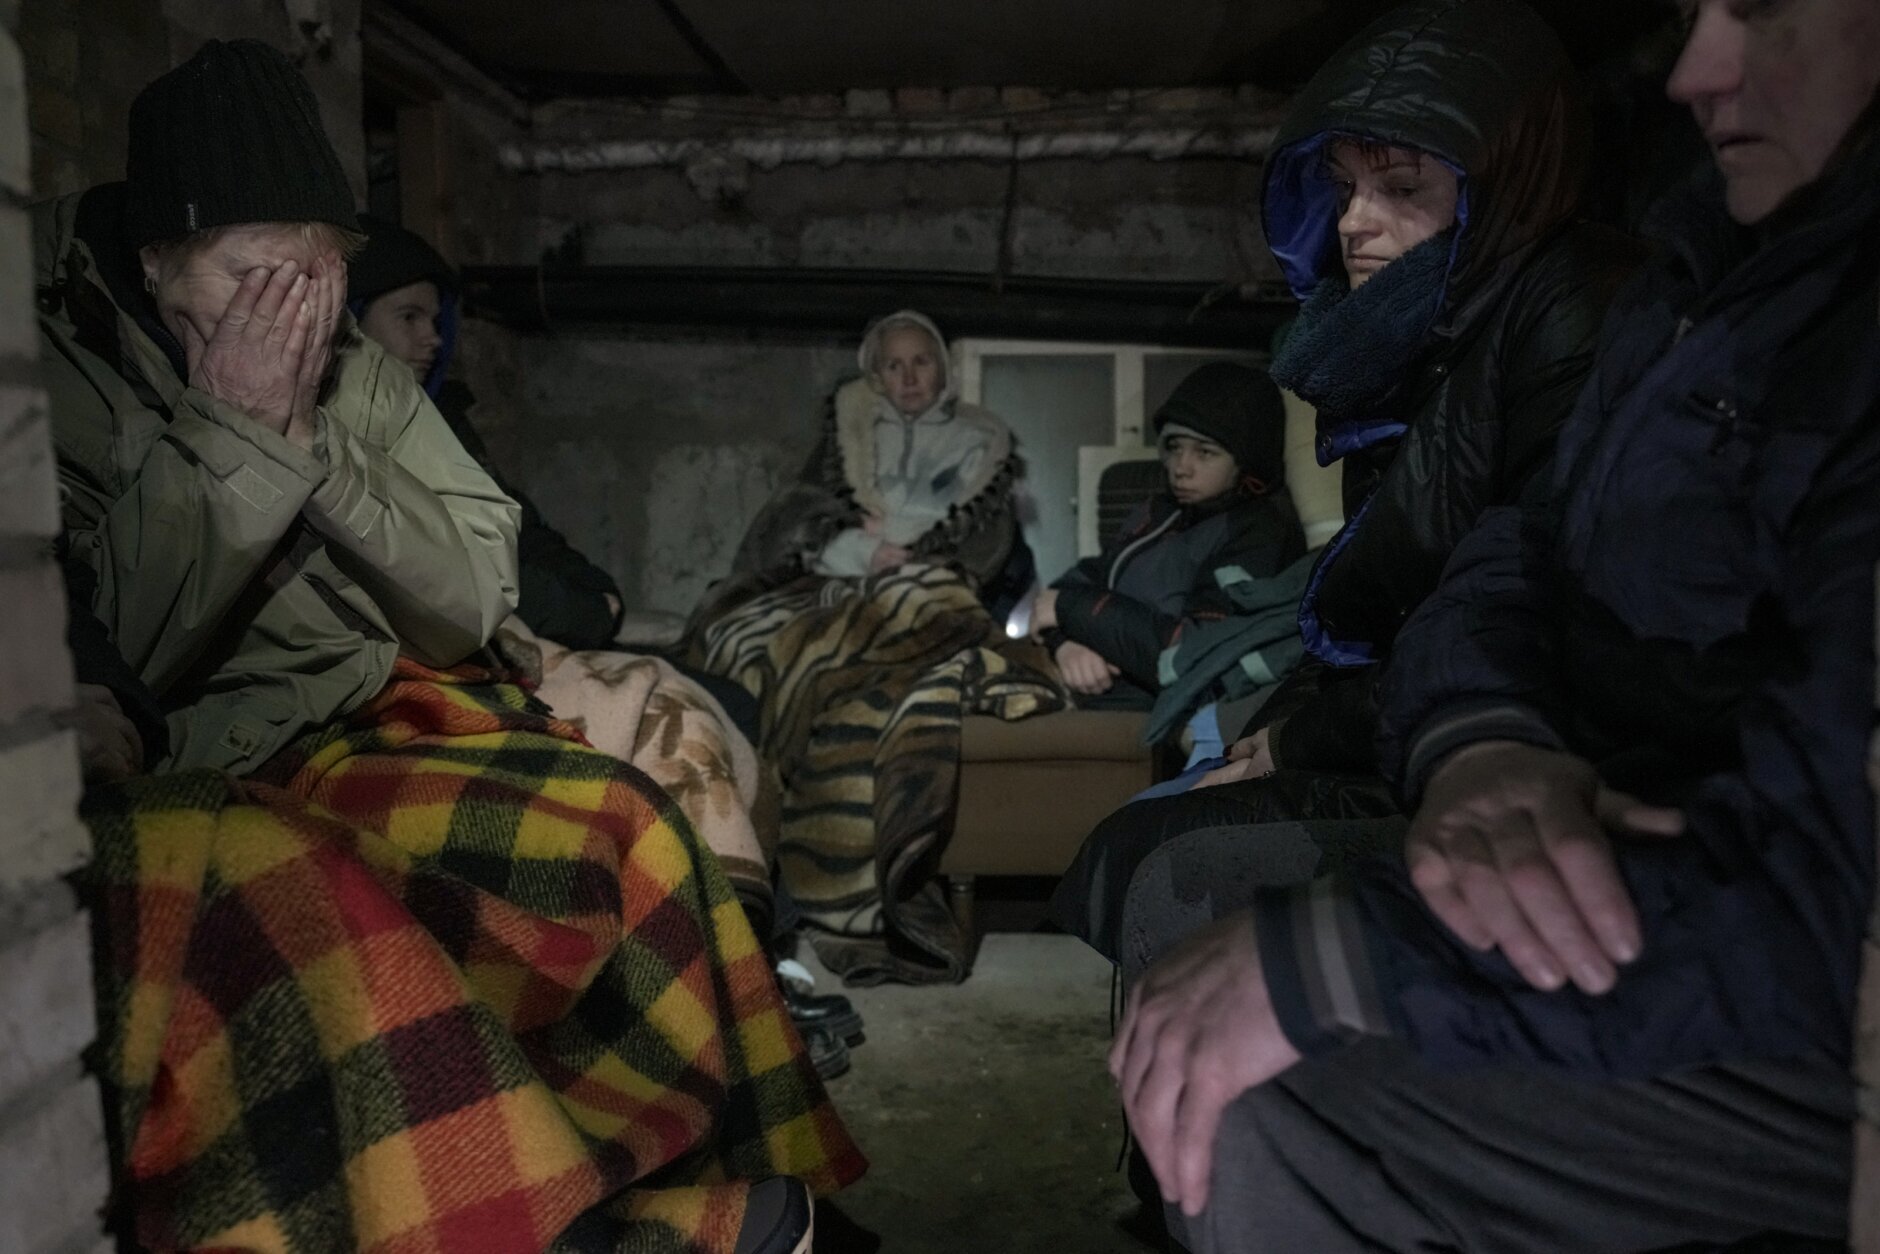 A woman cries in the small basement of a house crowded with people seeking shelter from Russian airstrikes and shelling in Gorenka, outside the capital Kyiv, Ukraine, Wednesday, March 2, 2022. (AP Photo/Vadim Ghirda)